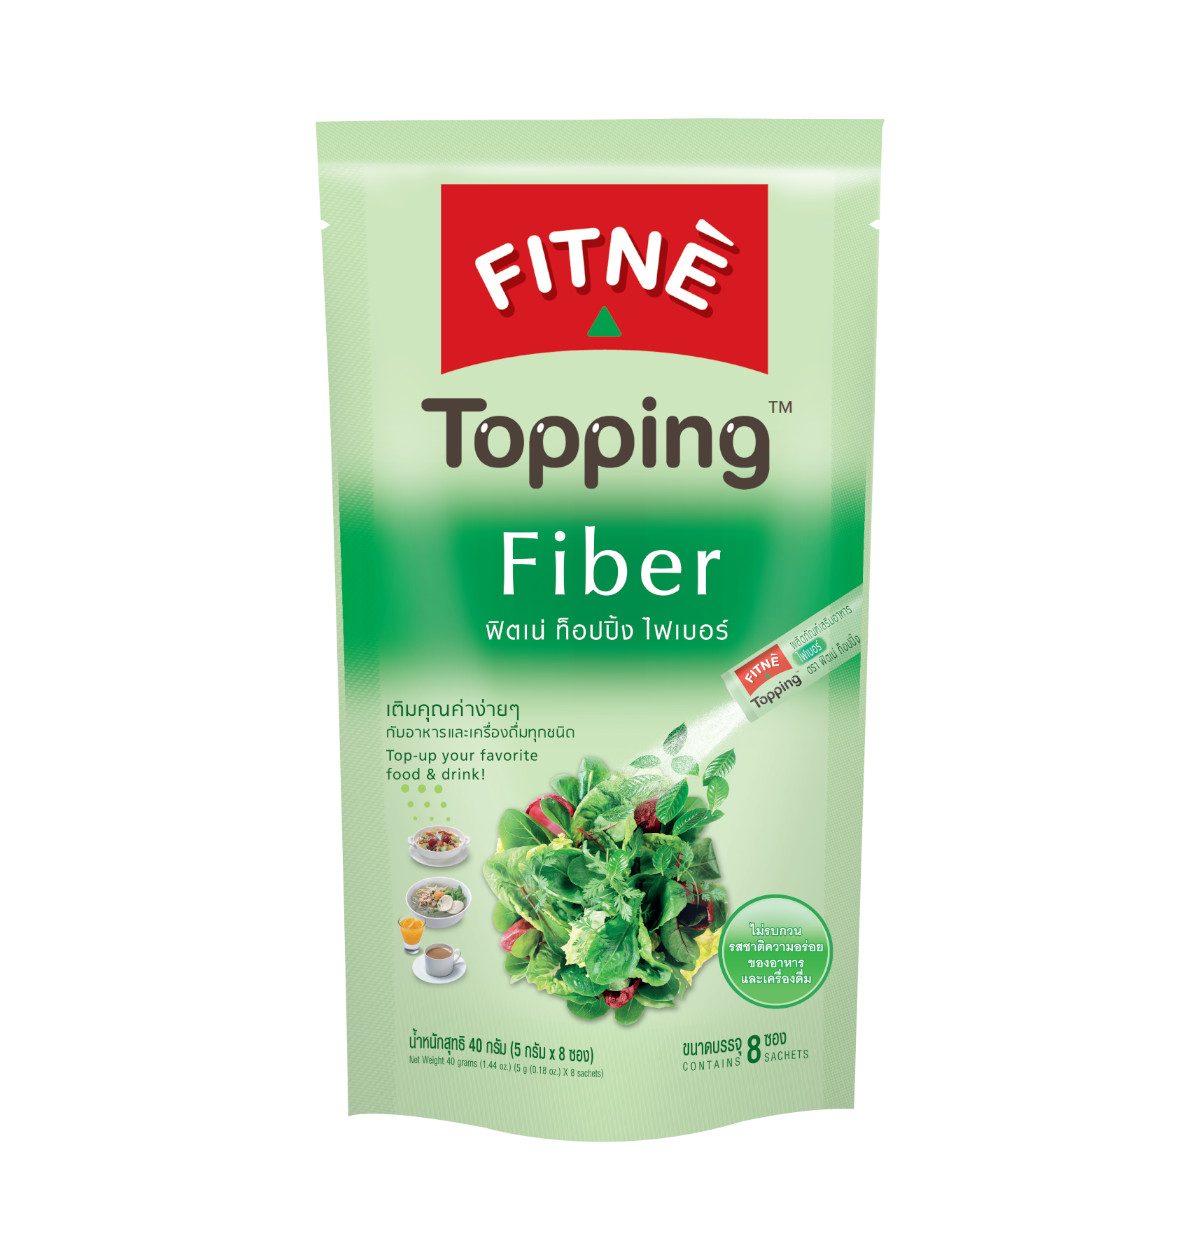 FITNE' Topping Fiber Dietary Supplement Product 5g.x8 Sticks